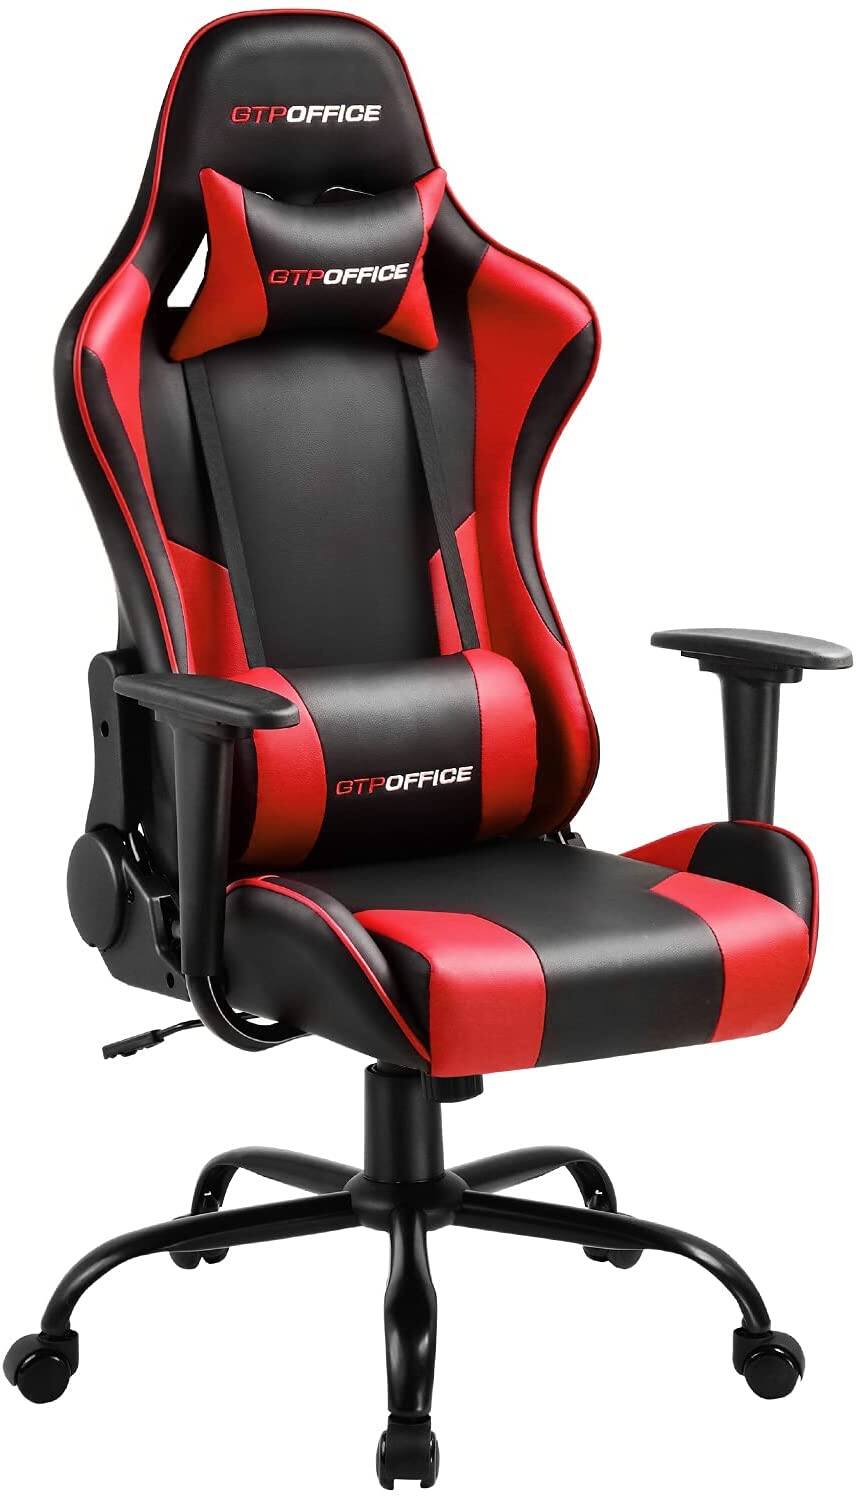 Gtracing Gaming Chair Massage Chair Racing Executive Ergonomic Adjustable Swivel Task Chair with Headrest and Lumbar Support,Red for $109.99 + Free Shipping